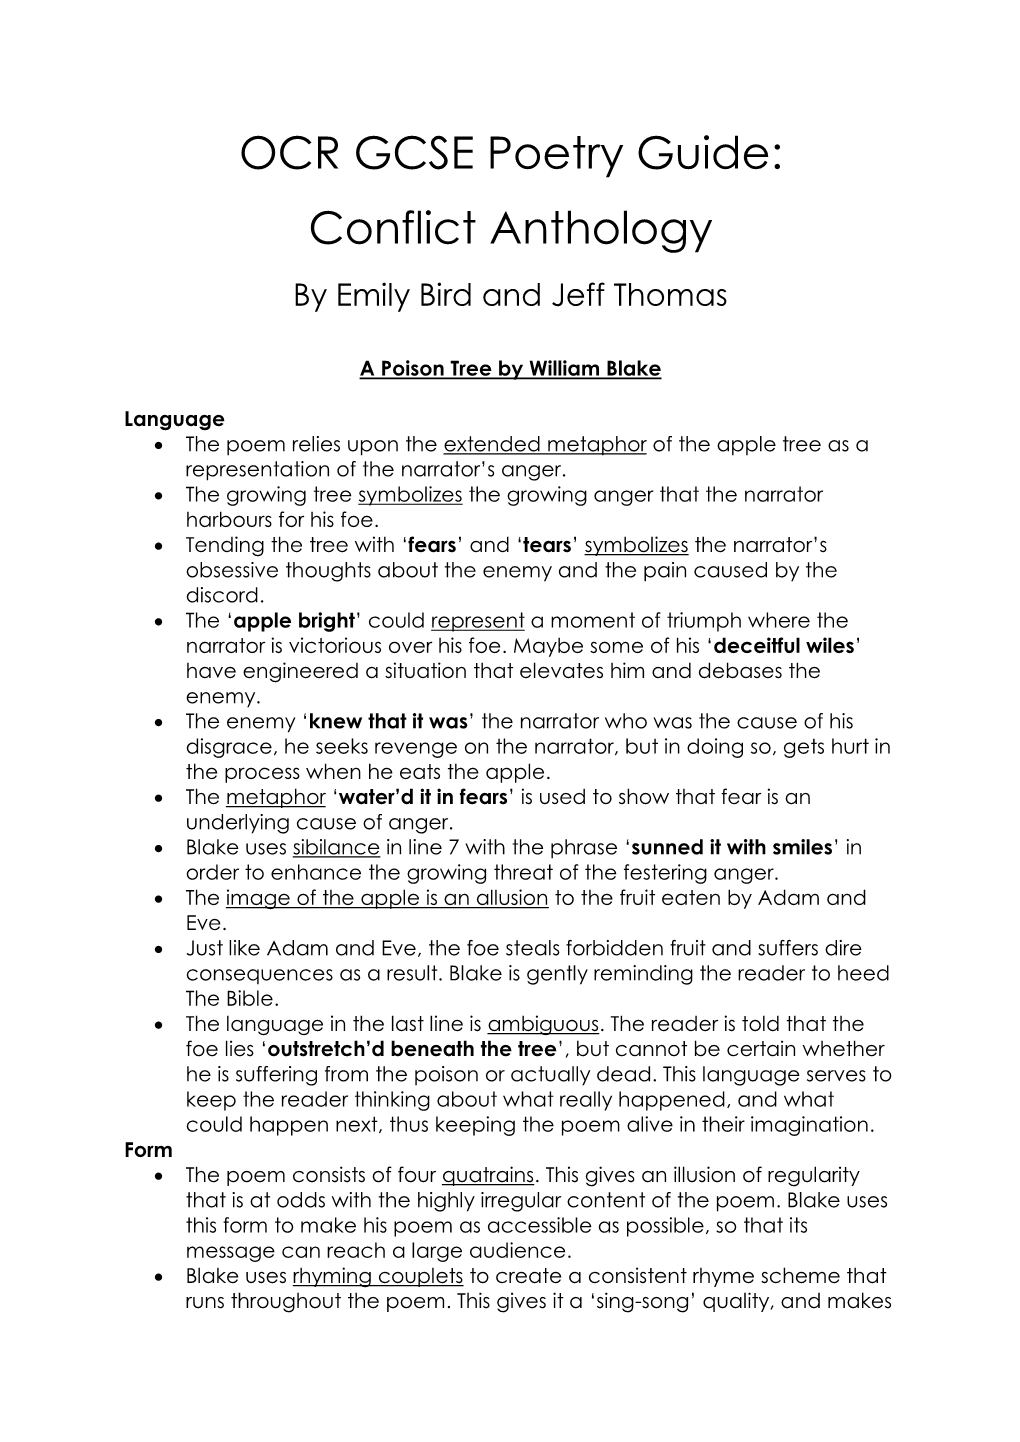 OCR GCSE Poetry Guide: Conflict Anthology by Emily Bird and Jeff Thomas